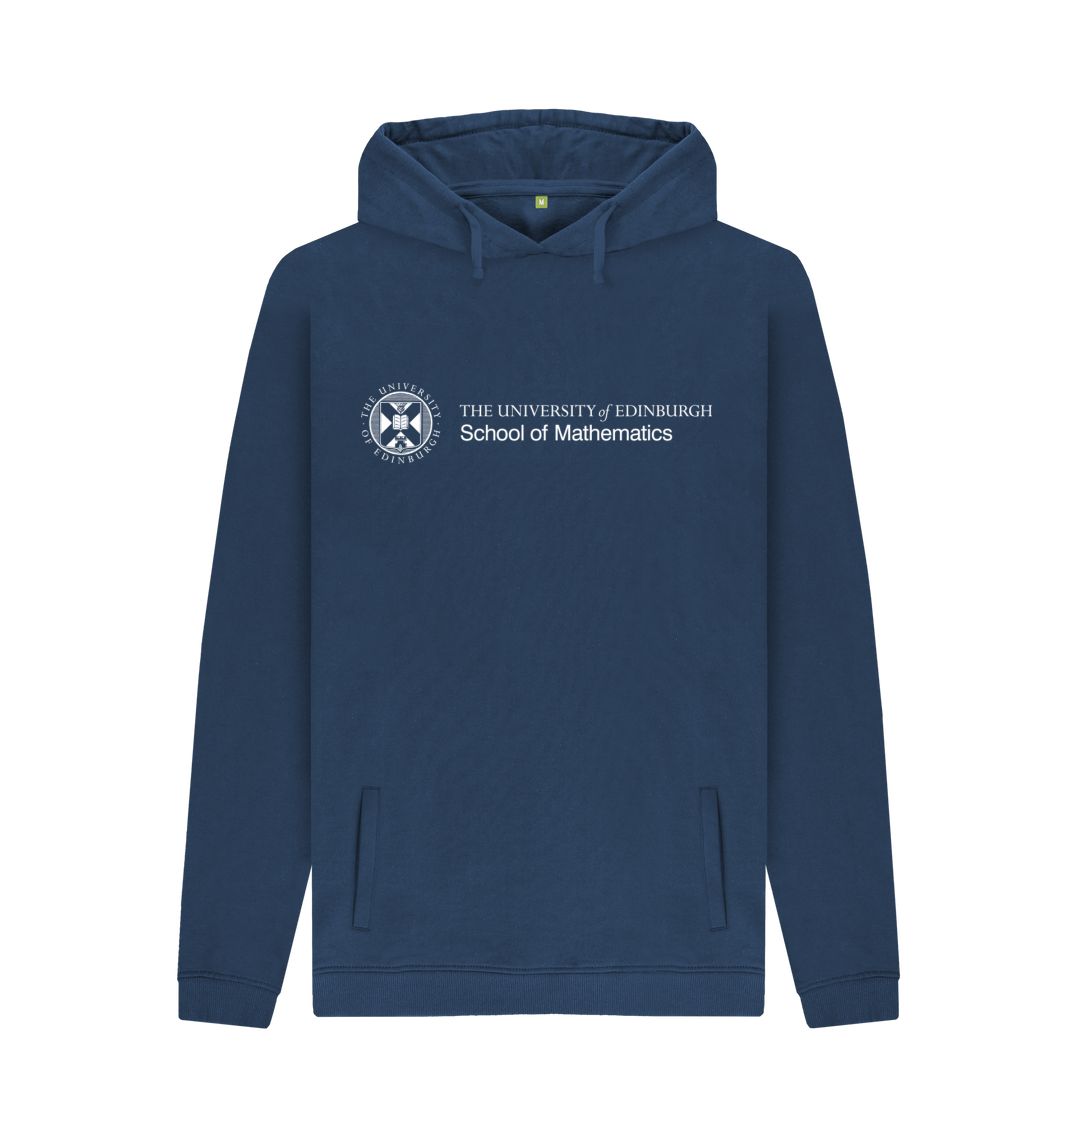 Navy hoodie with white University crest and text that reads ' University of Edinburgh School of Mathematics